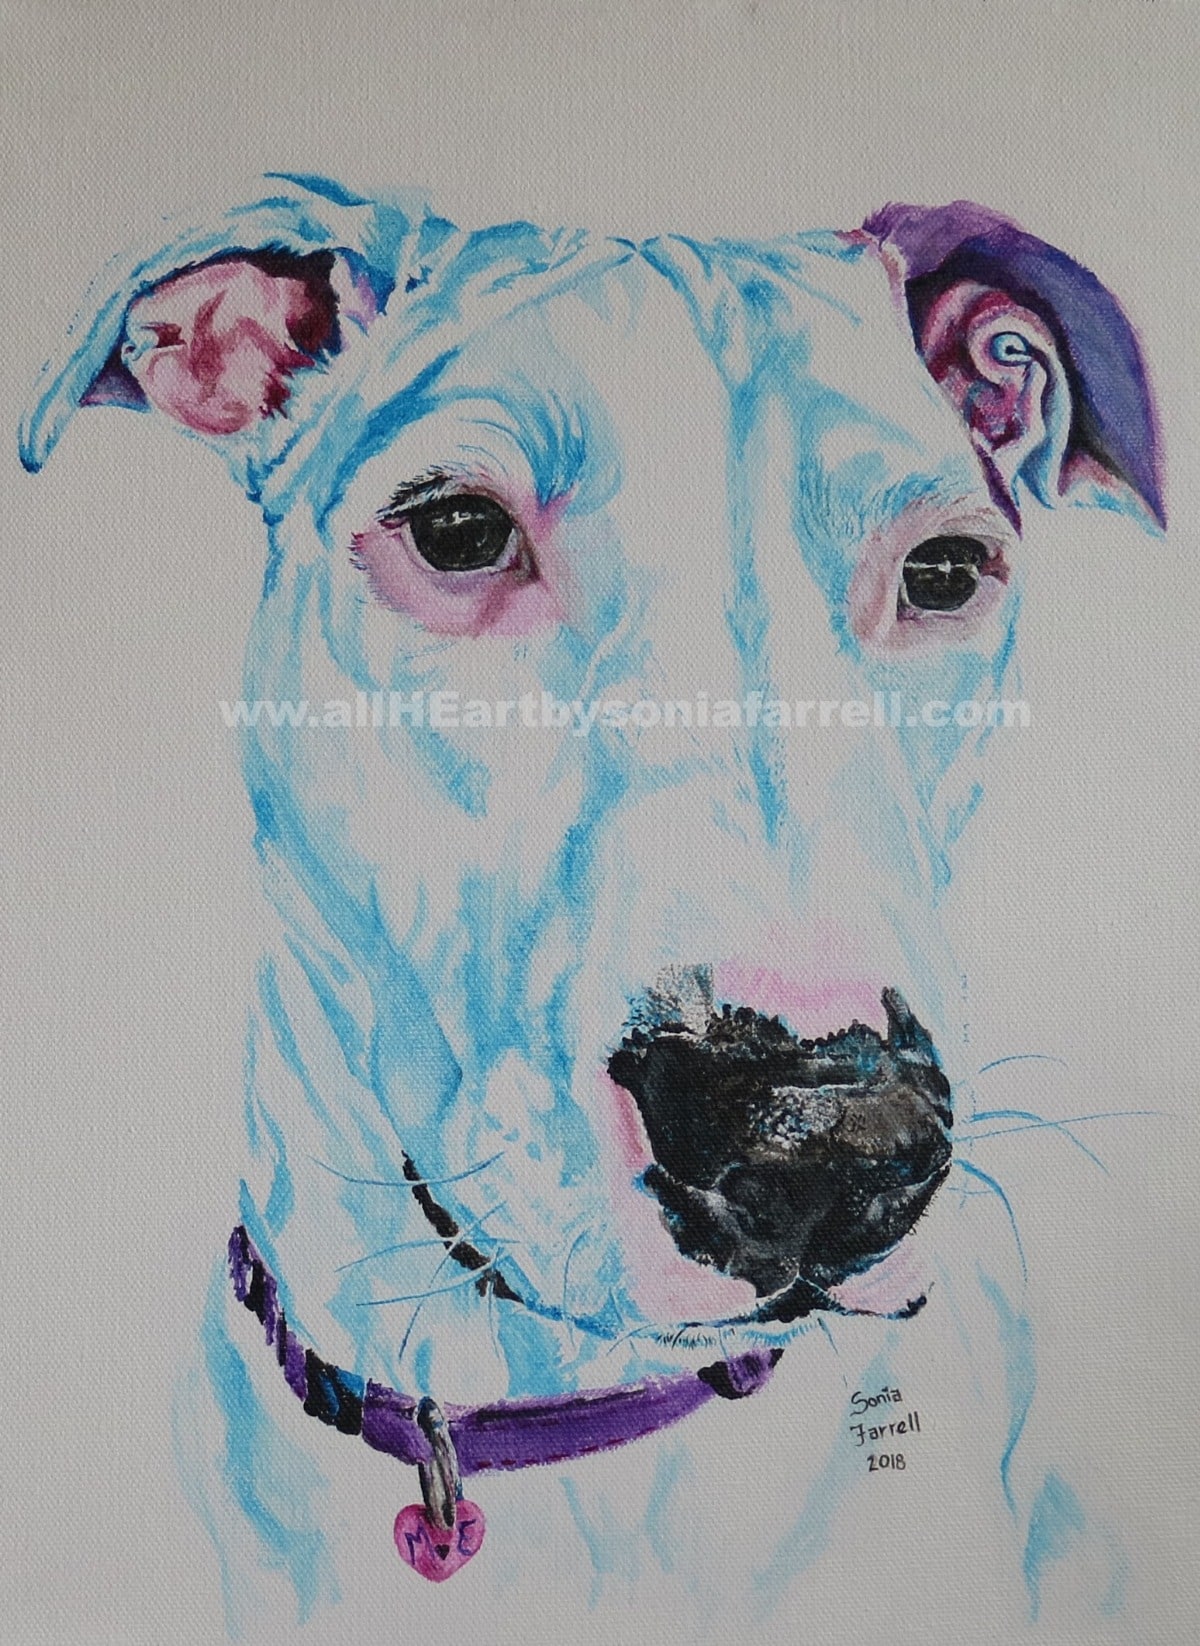 More about having a Custom artwork painted by Sonia Farrell